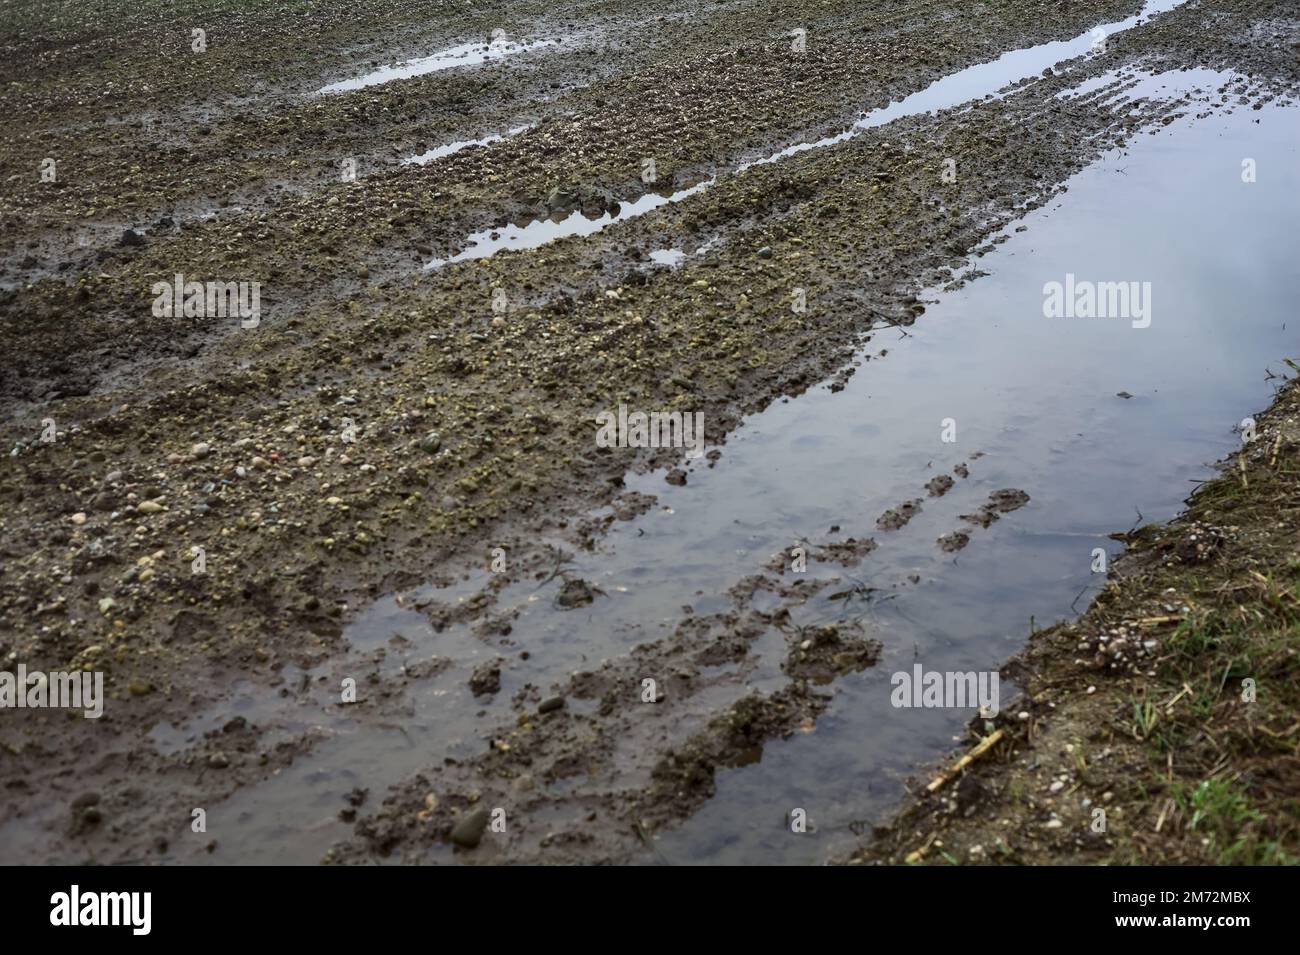 Puddle  in a cultivated field seen up close Stock Photo